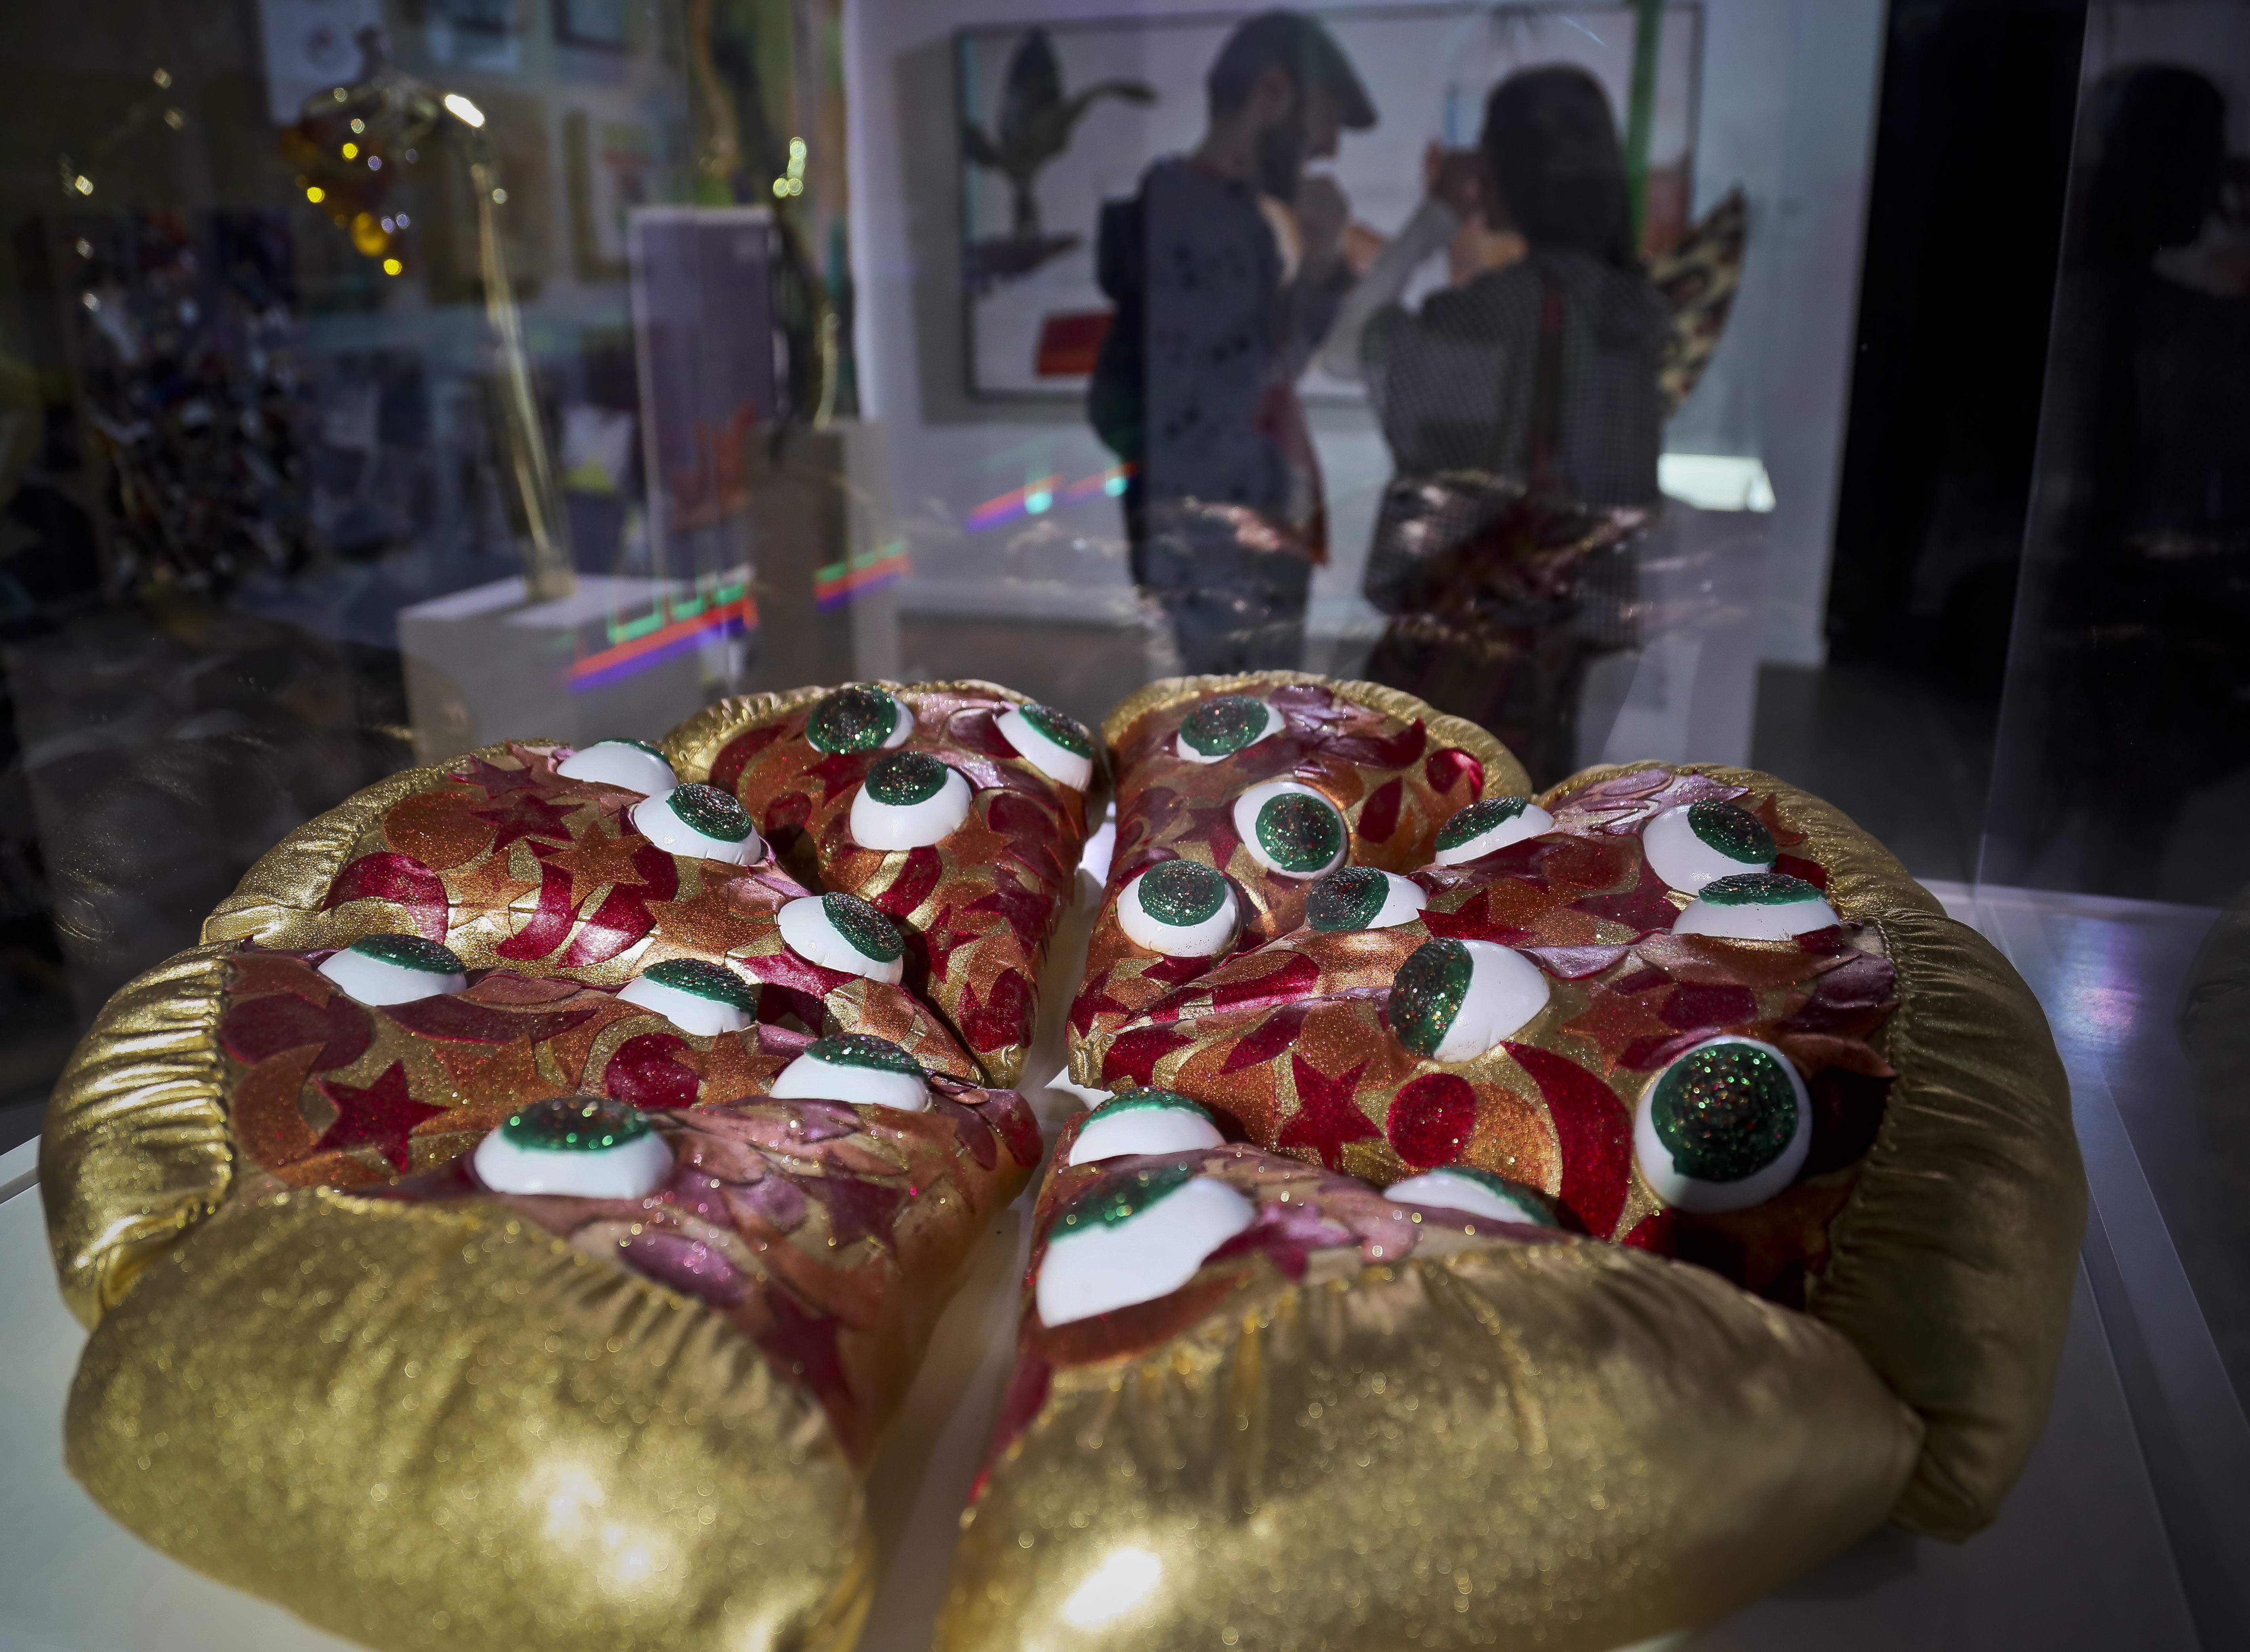 A textile sculpture from artist Hein Koh called Mystic Pizza, part of a group art exhibition celebrating pizza at The Museum of Pizza in New York